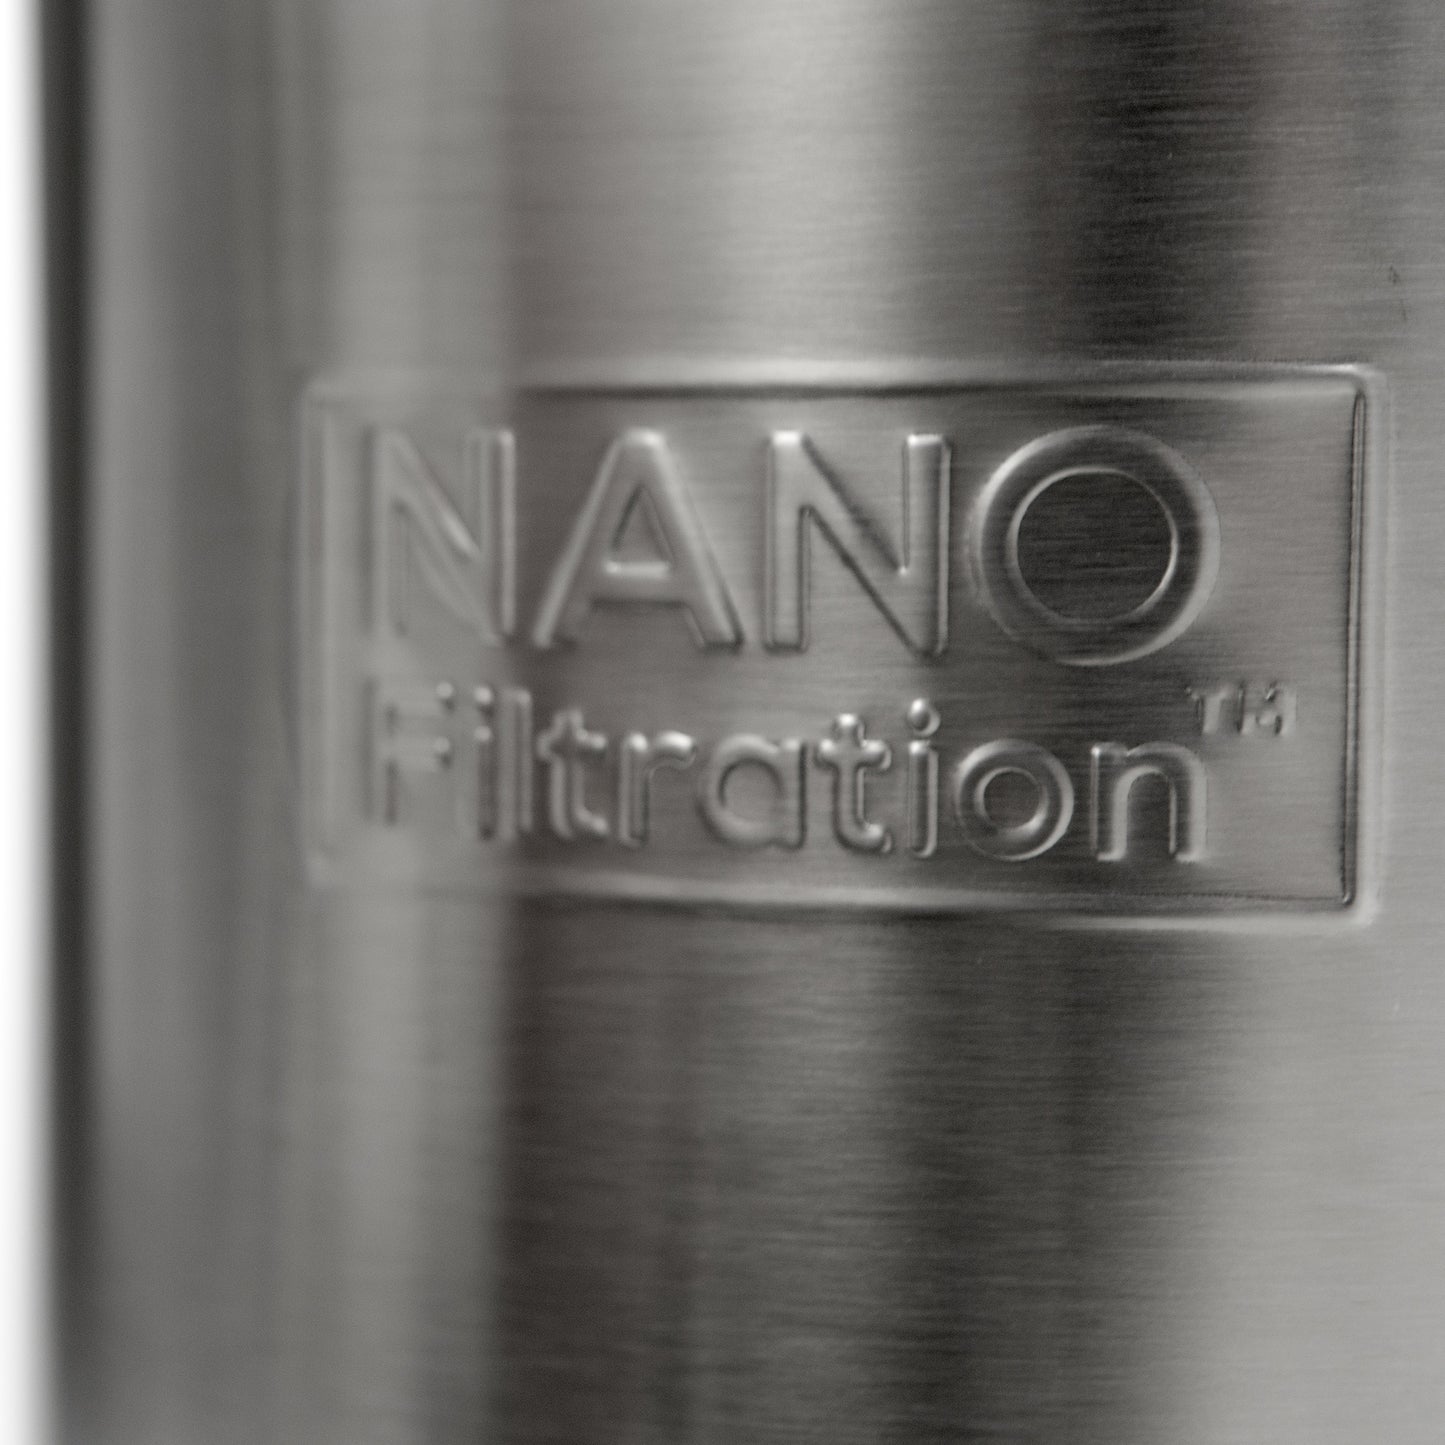 Stainless Steel Gravity Countertop Water Filtration System - 2 Sizes 2.4 and 3.3 Gallon using Nano Technology